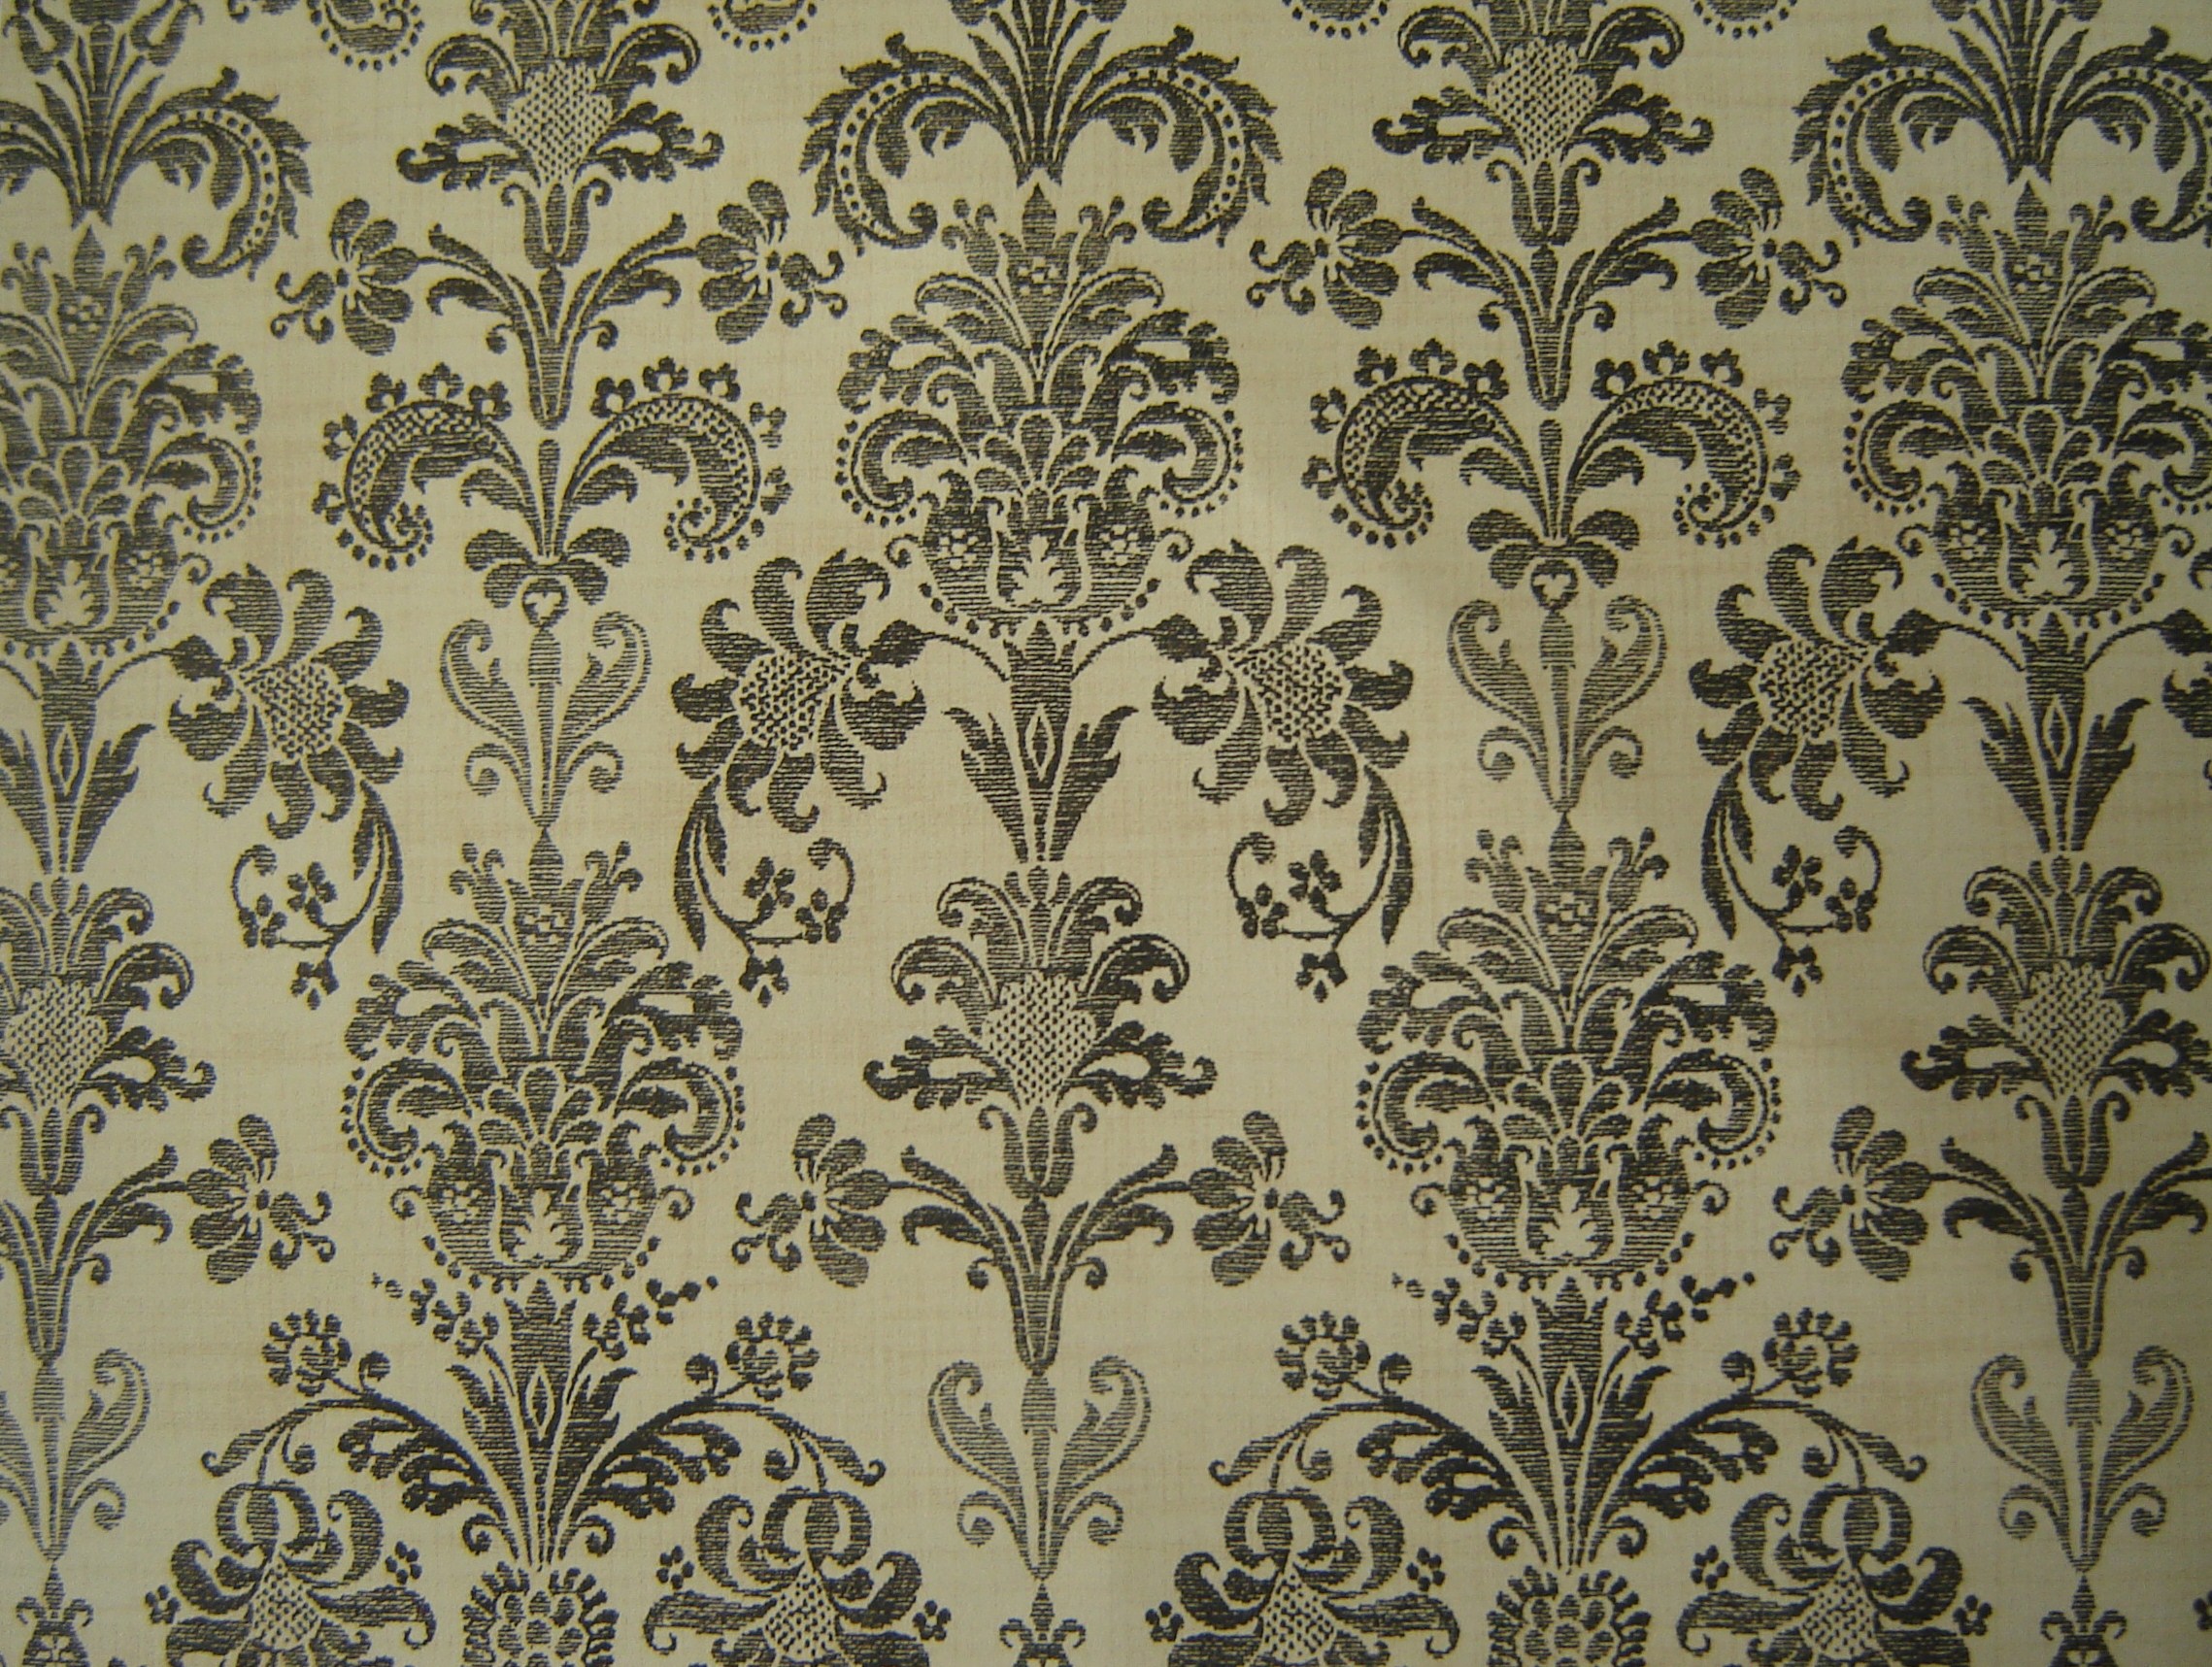  Wall Paper Pattern to Enrich the Entire House Appearance Home design 2278x1717